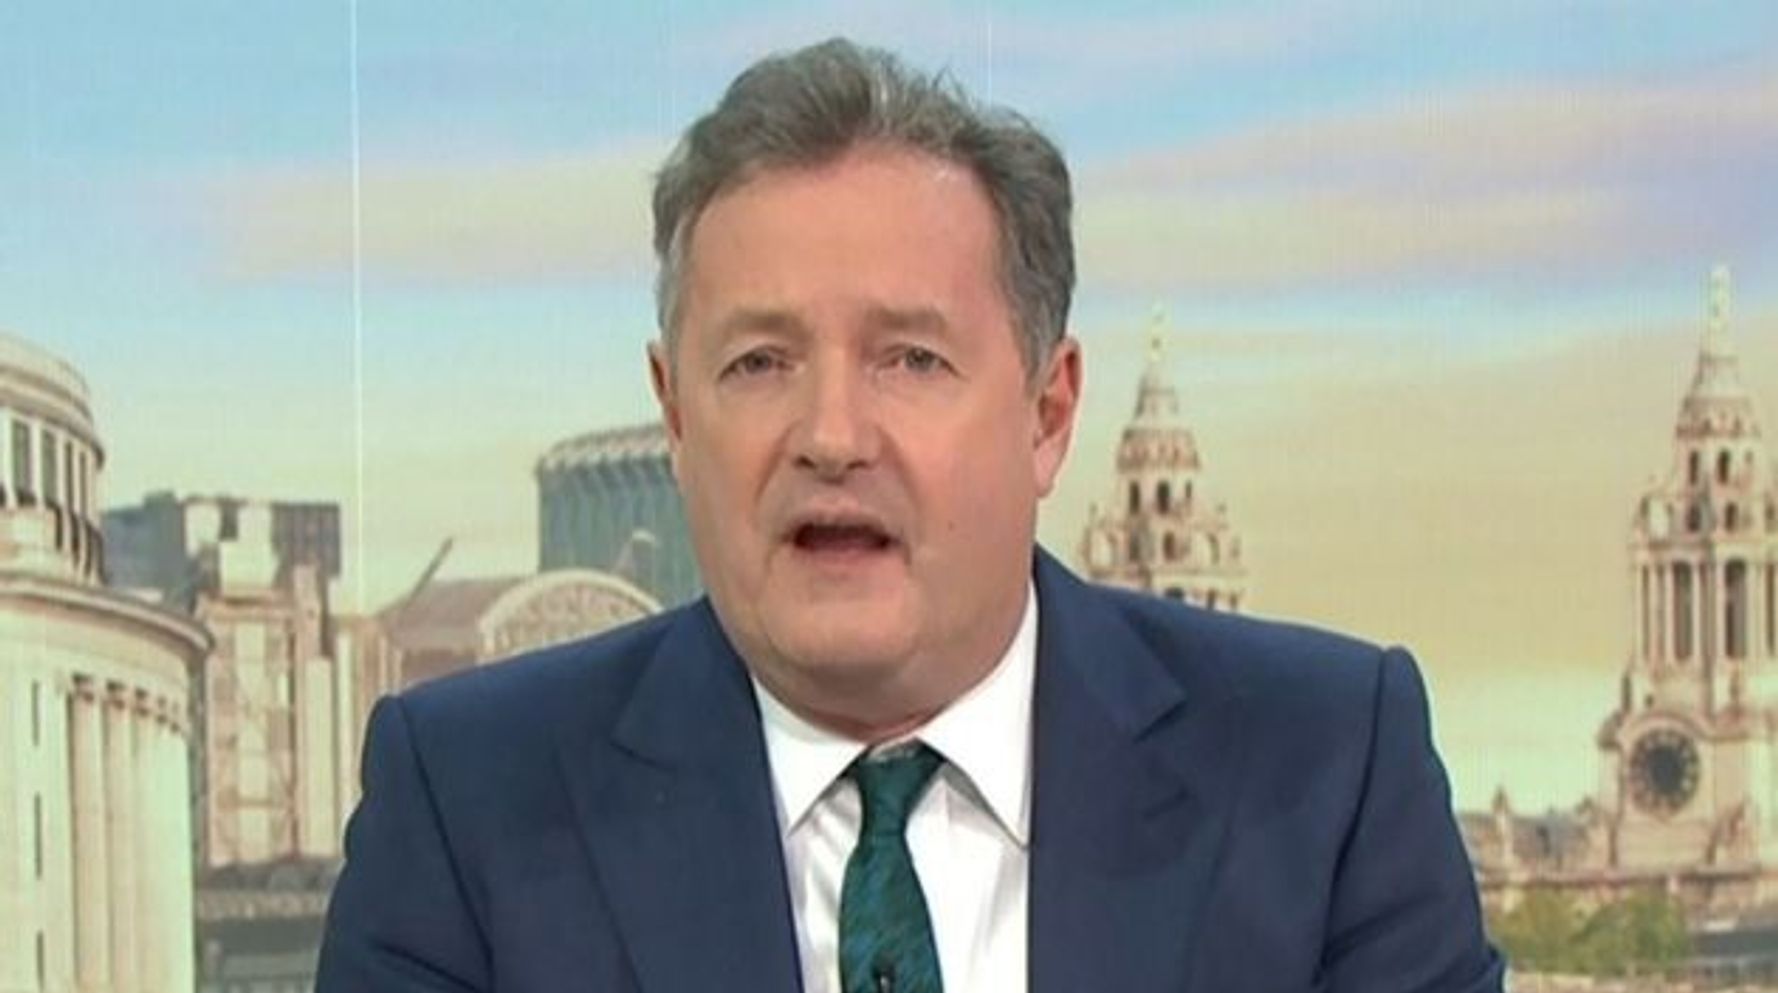 Piers Morgan leaves Good morning Great Britain after the controversial remarks of Meghan Markle